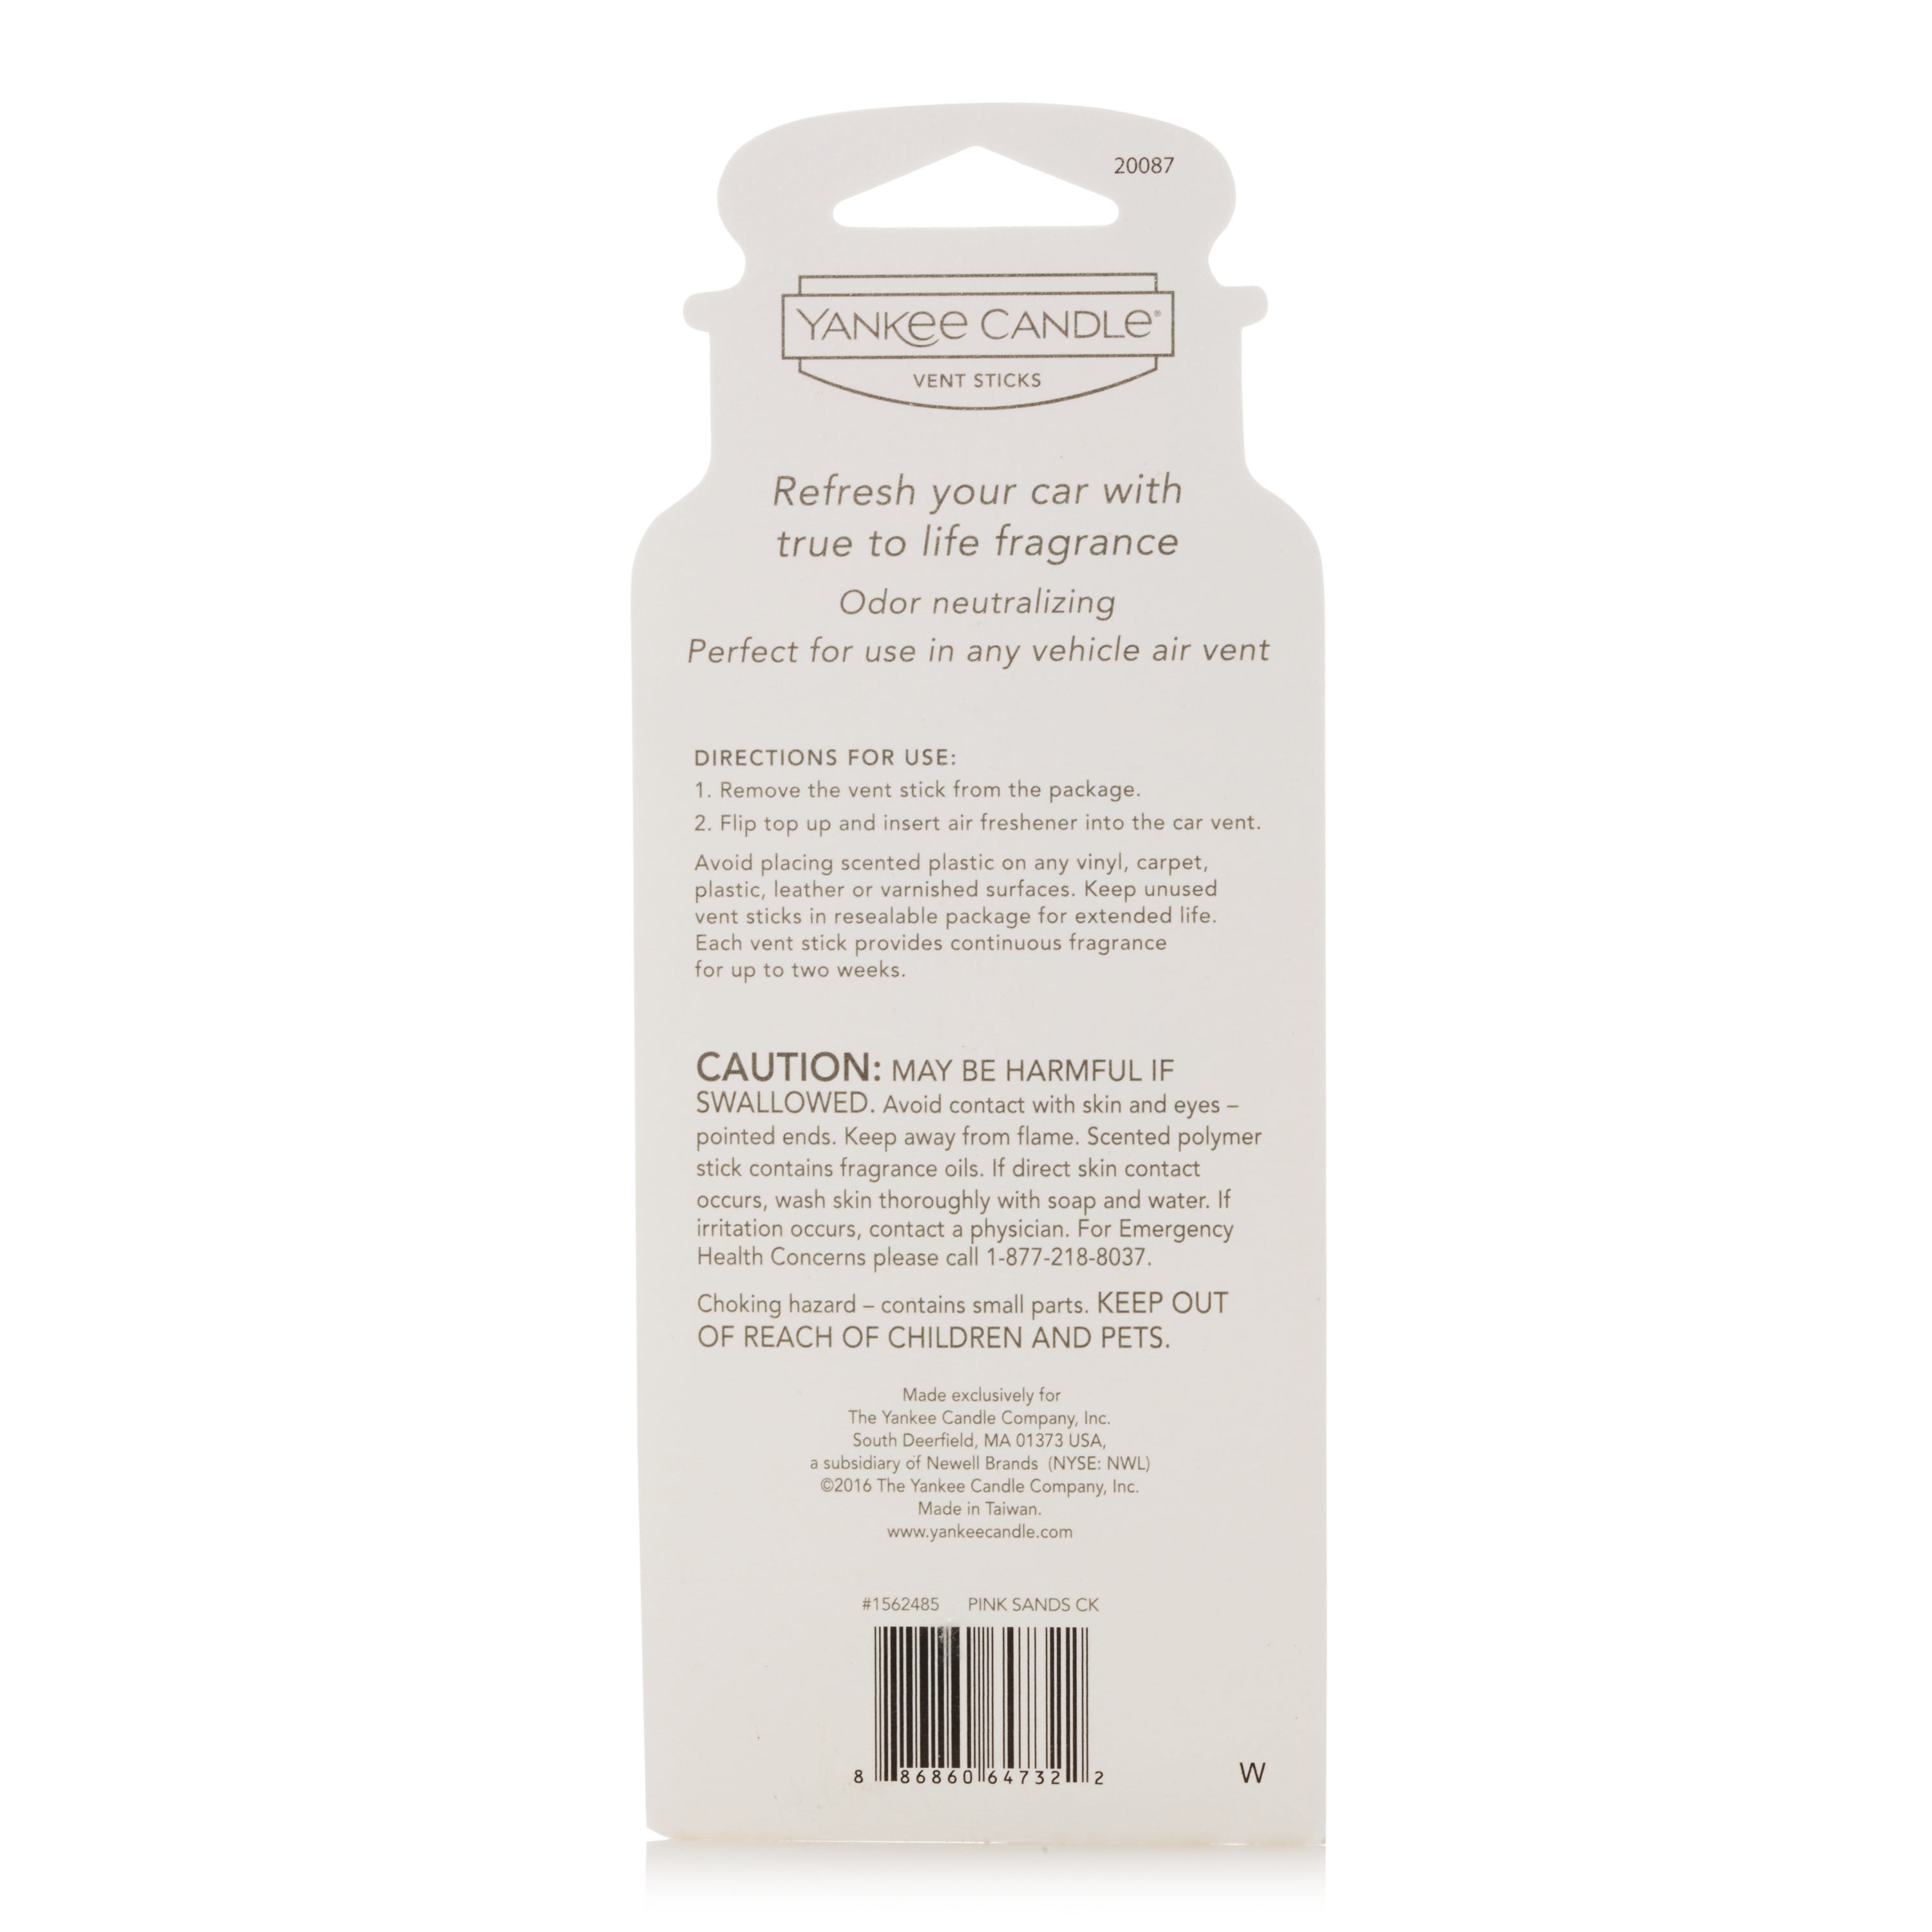 Yankee Candle Vent Stick Air Freshener - Pink Sands CASE PACK 6